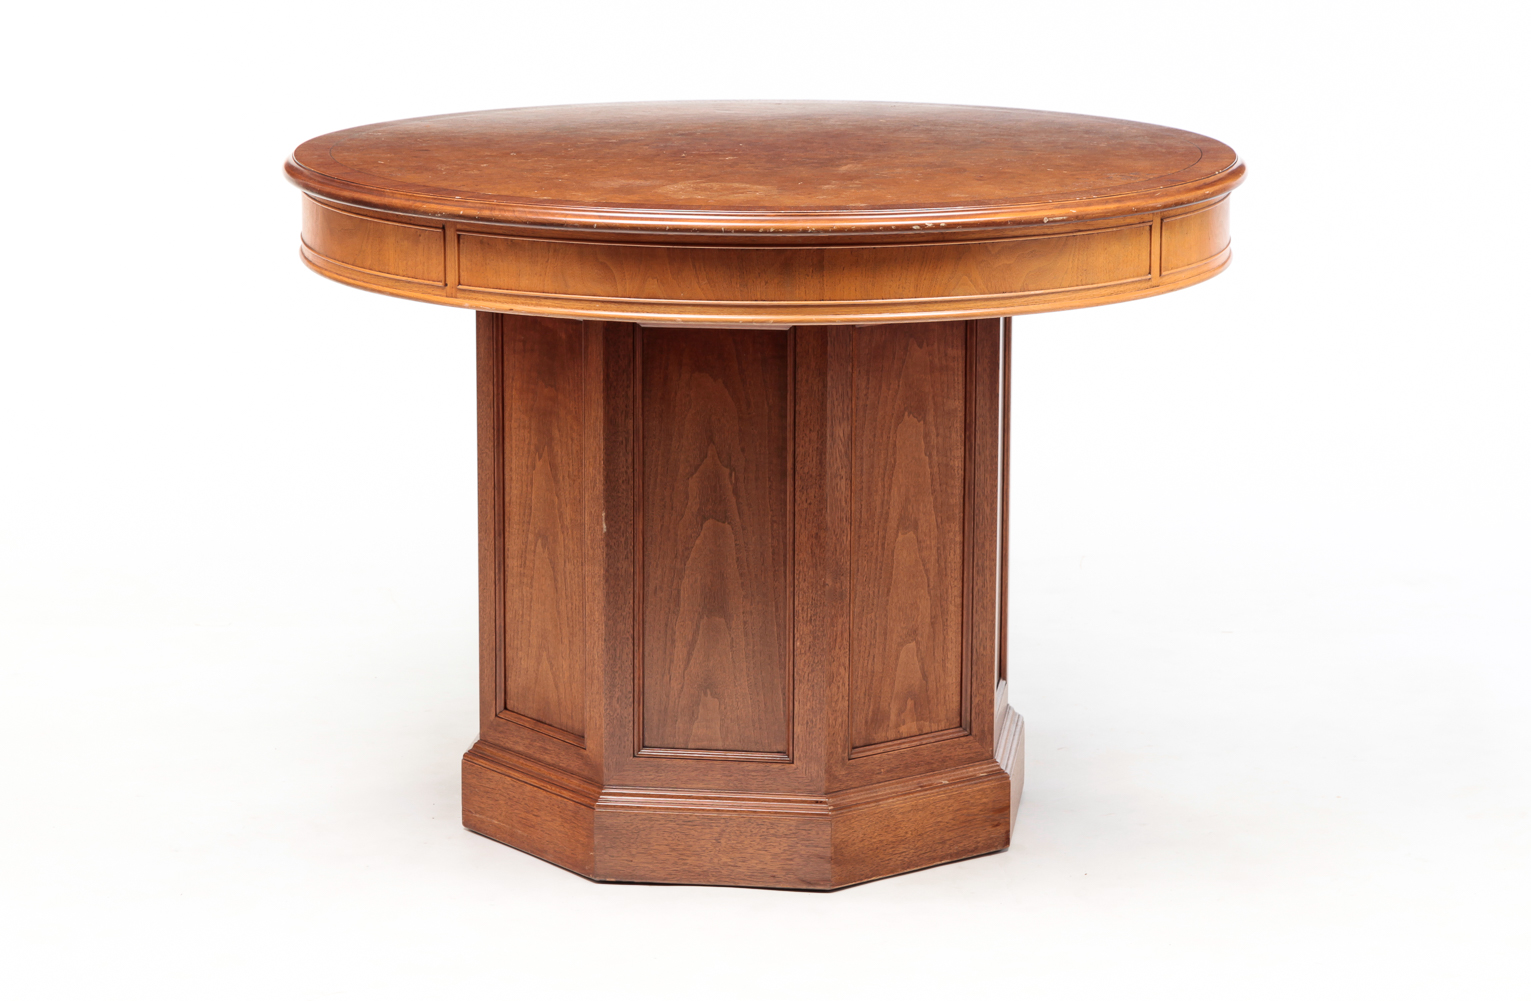 AMERICAN ROUND CENTER TABLE. Late